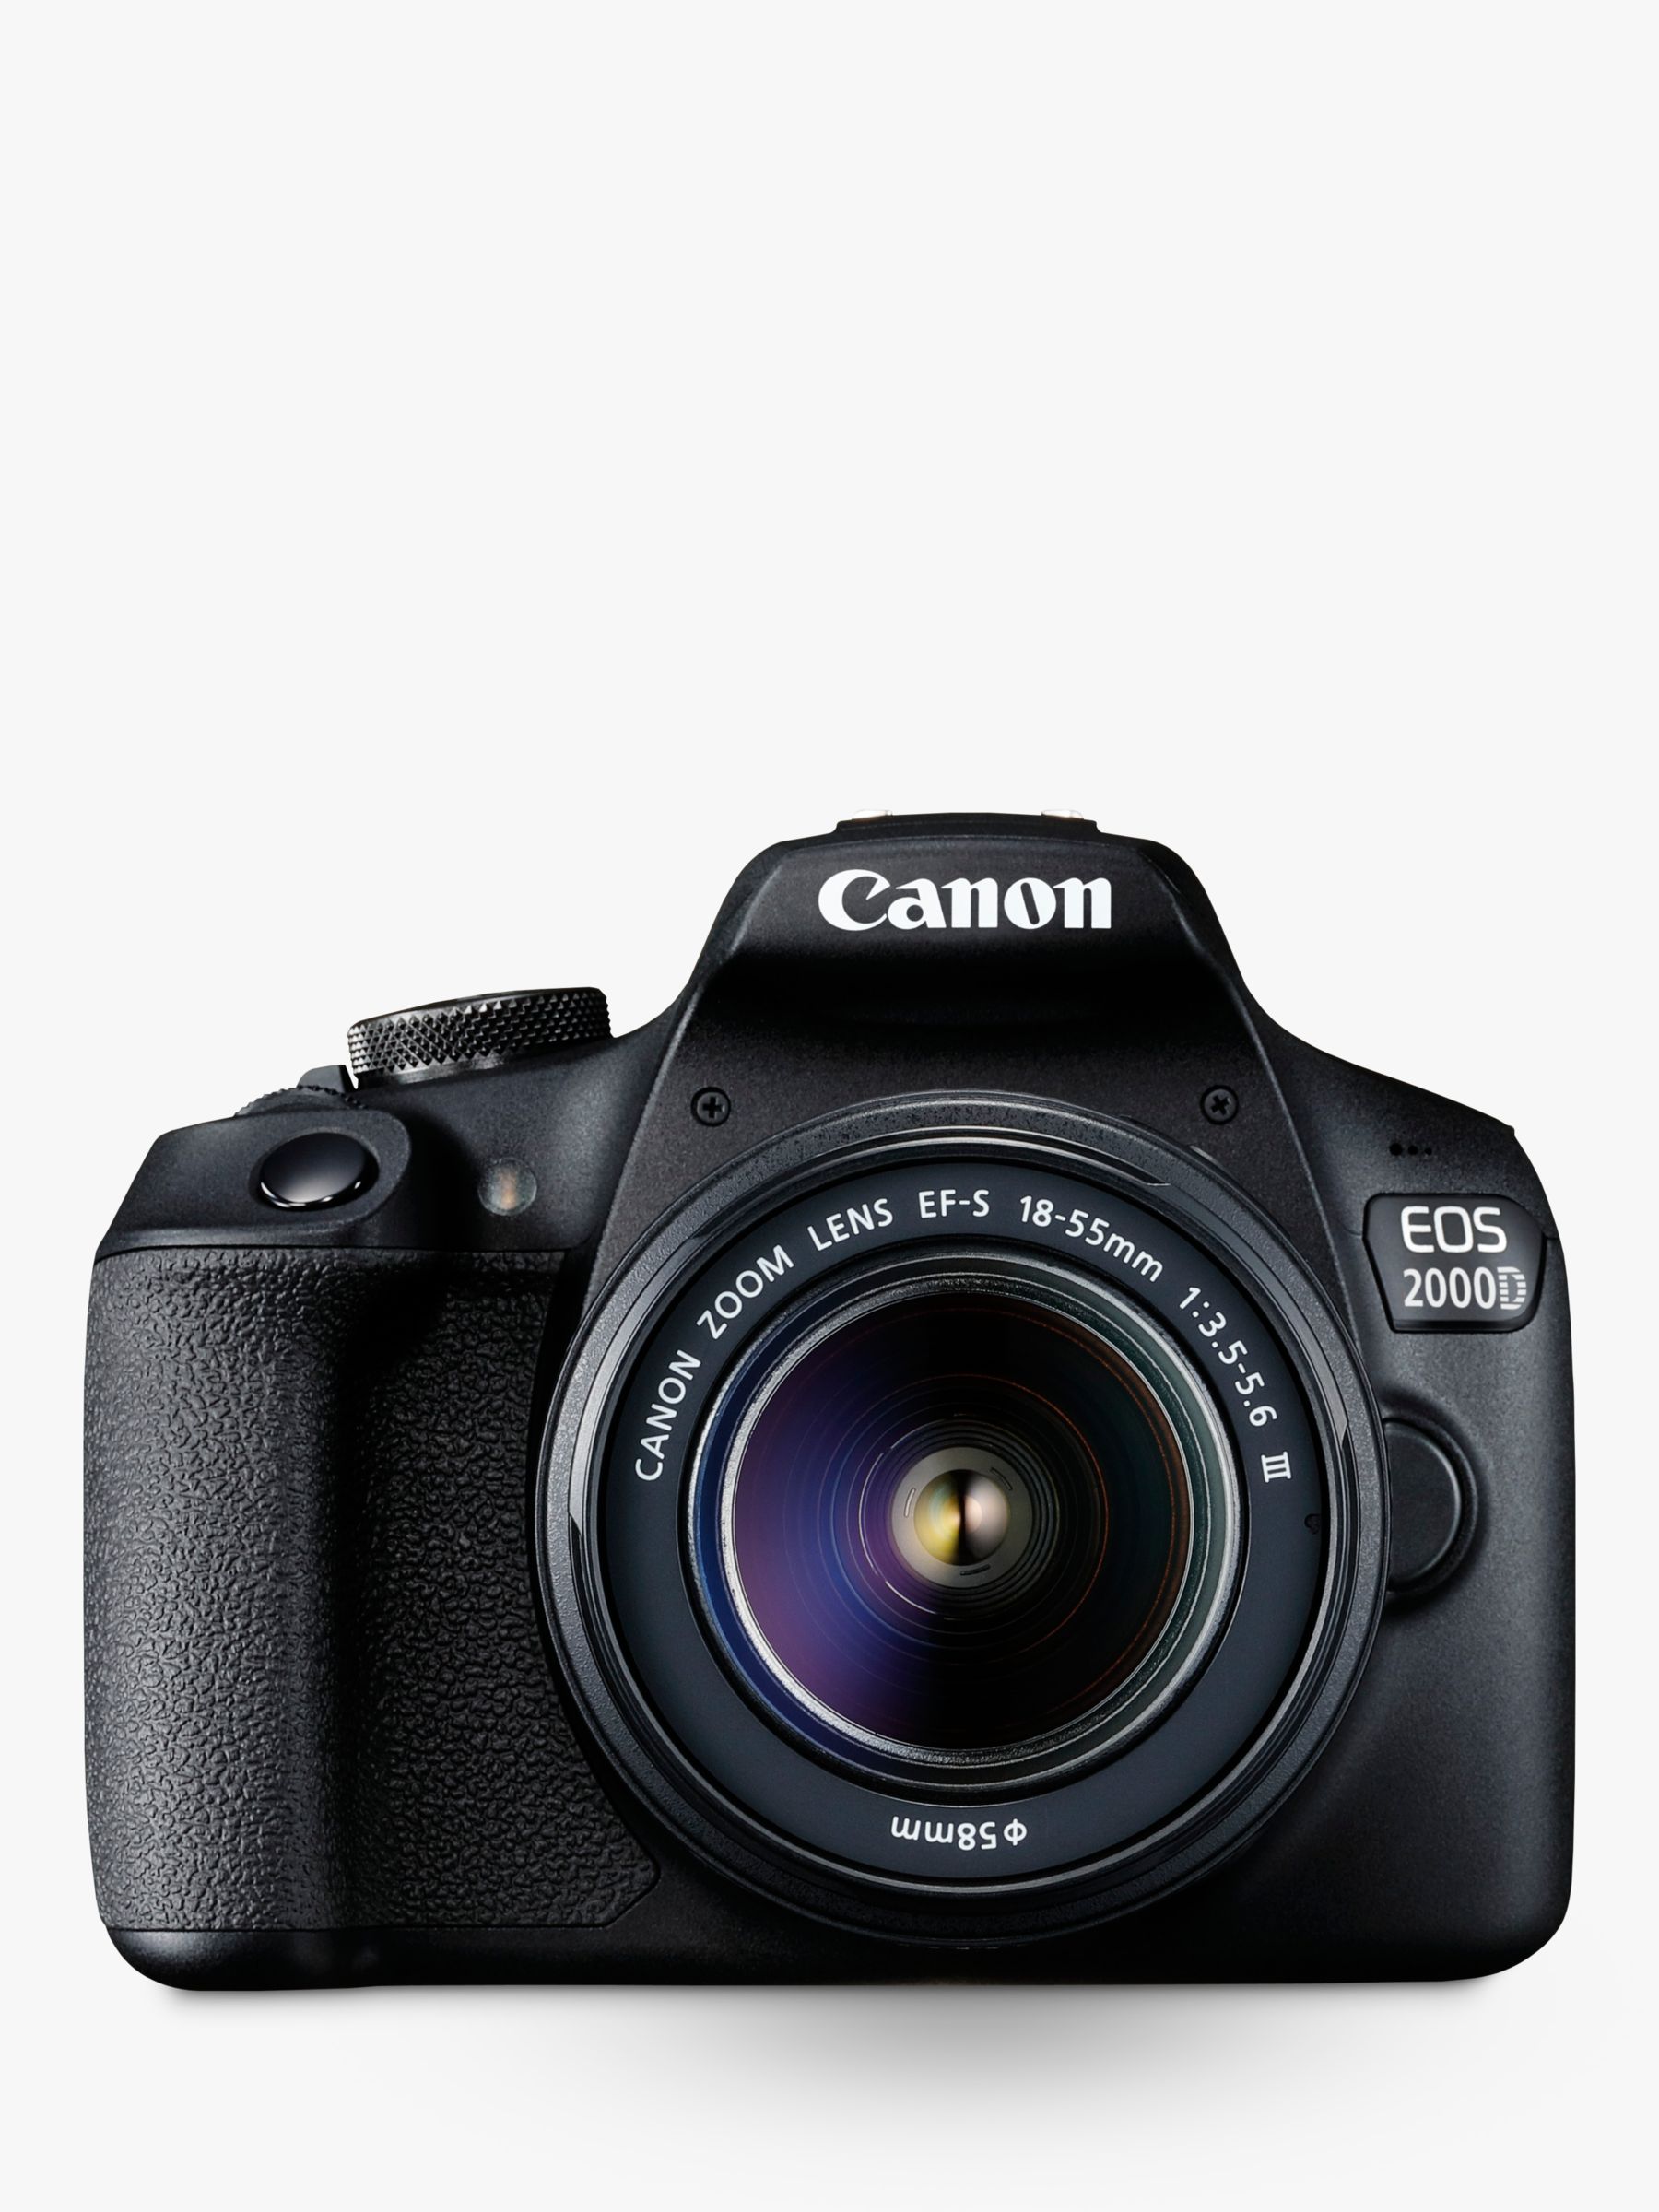 Sleutel Maand Ontslag Canon EOS 2000D Digital SLR Camera with 18-55mm III DC Lens, 1080p Full HD,  24.1MP, Wi-Fi, NFC, Optical Viewfinder, 3" LCD Screen, Black